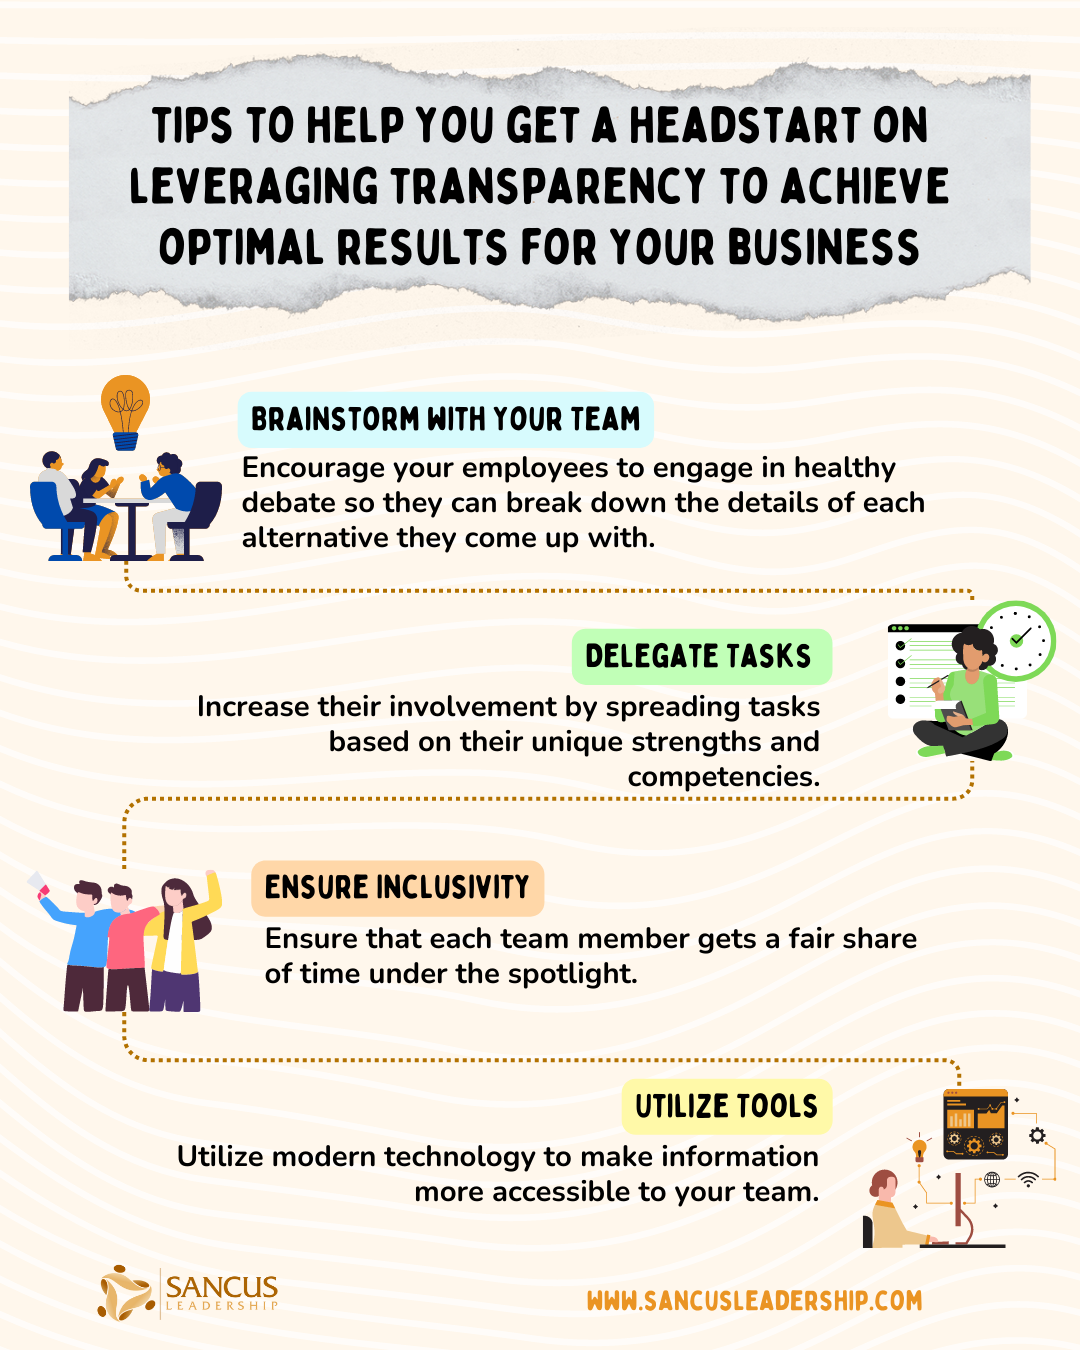 Tips to get a head start on leveraging transparency